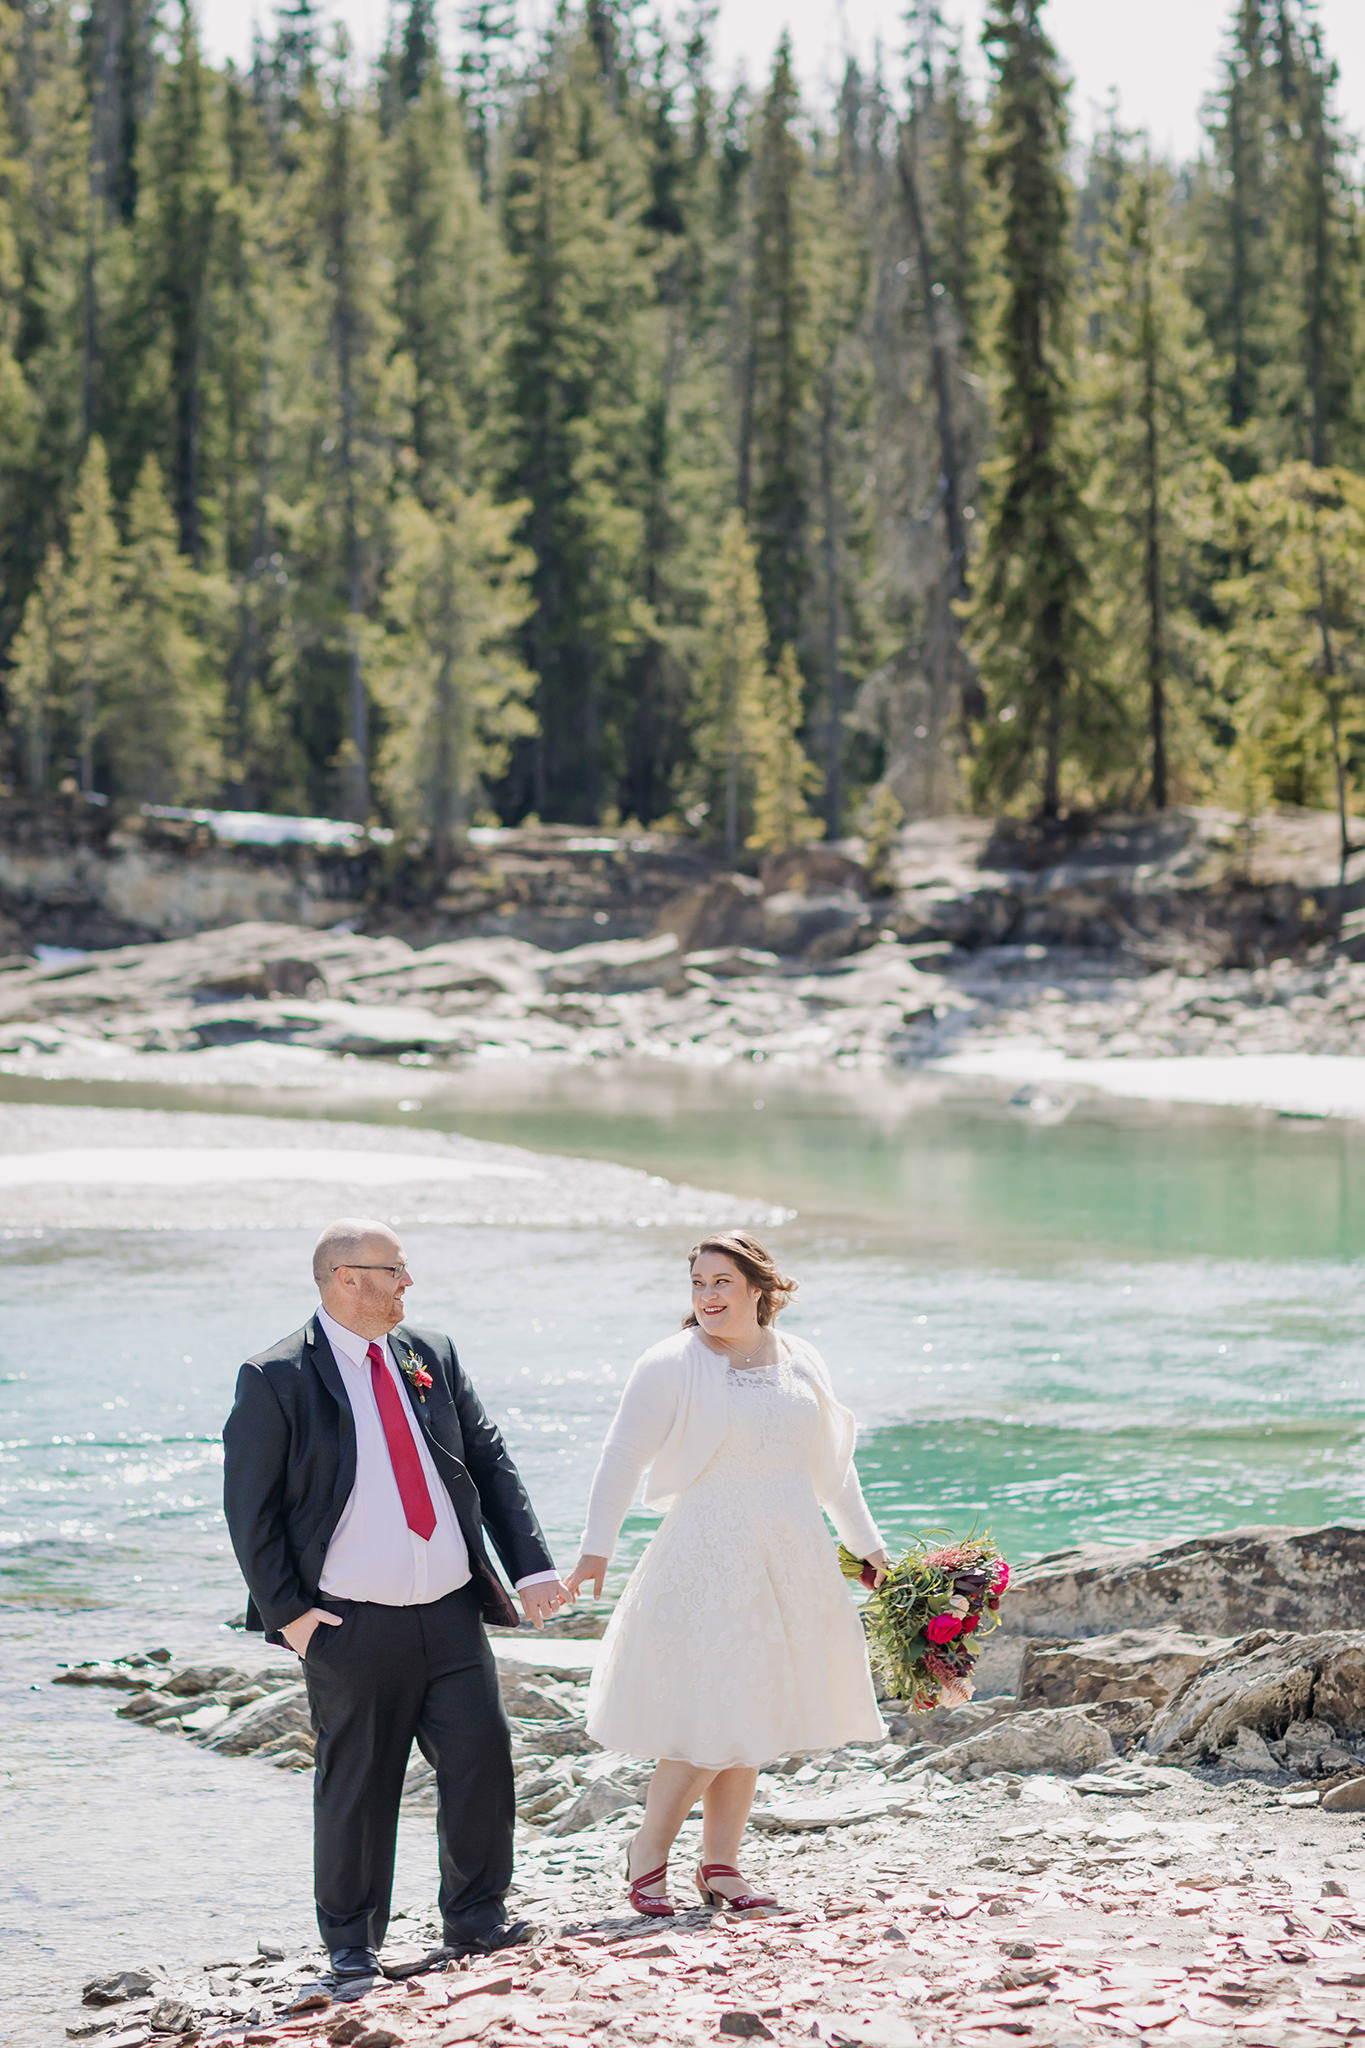 Emerald Lake Lodge intimate bride & groom portraits at the nearby Natural Bridge in Yoho National Park in late April